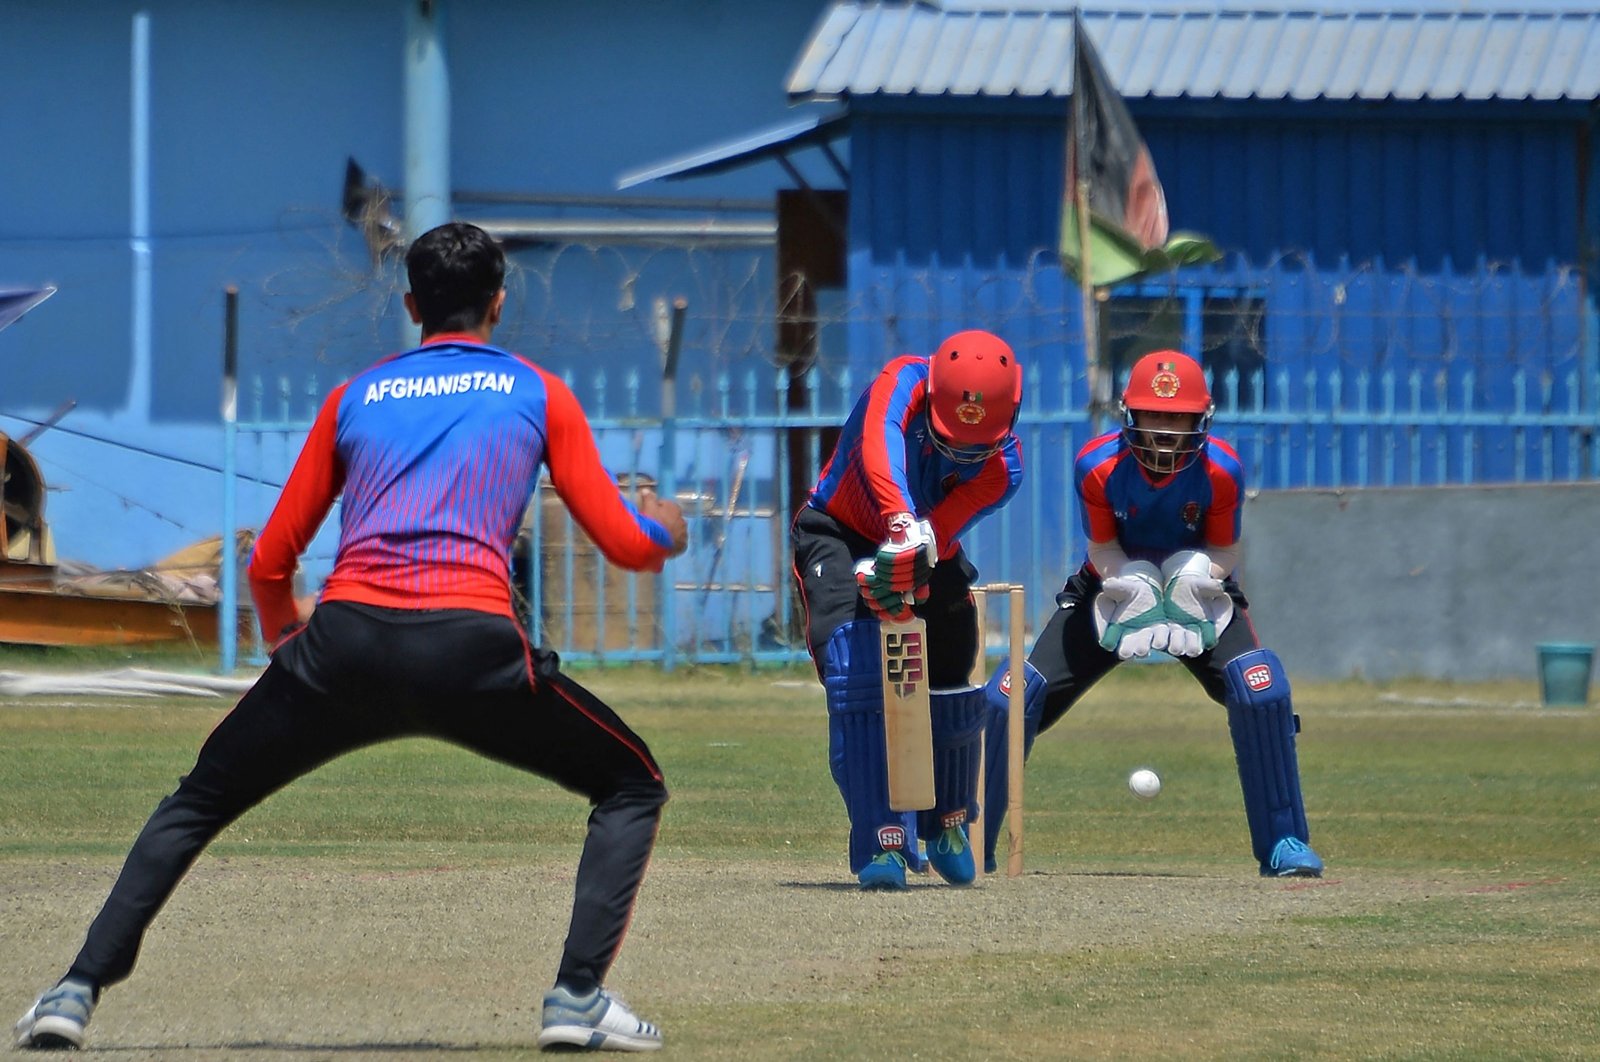 Afghan national cricket team players attend a training session at the Kabul International Cricket Ground Kabul, Afghanistan, Aug. 21, 2021, ahead of their canceled one-day series against Pakistan that was scheduled to take place in Sri Lanka in two weeks time. (AFP Photo)